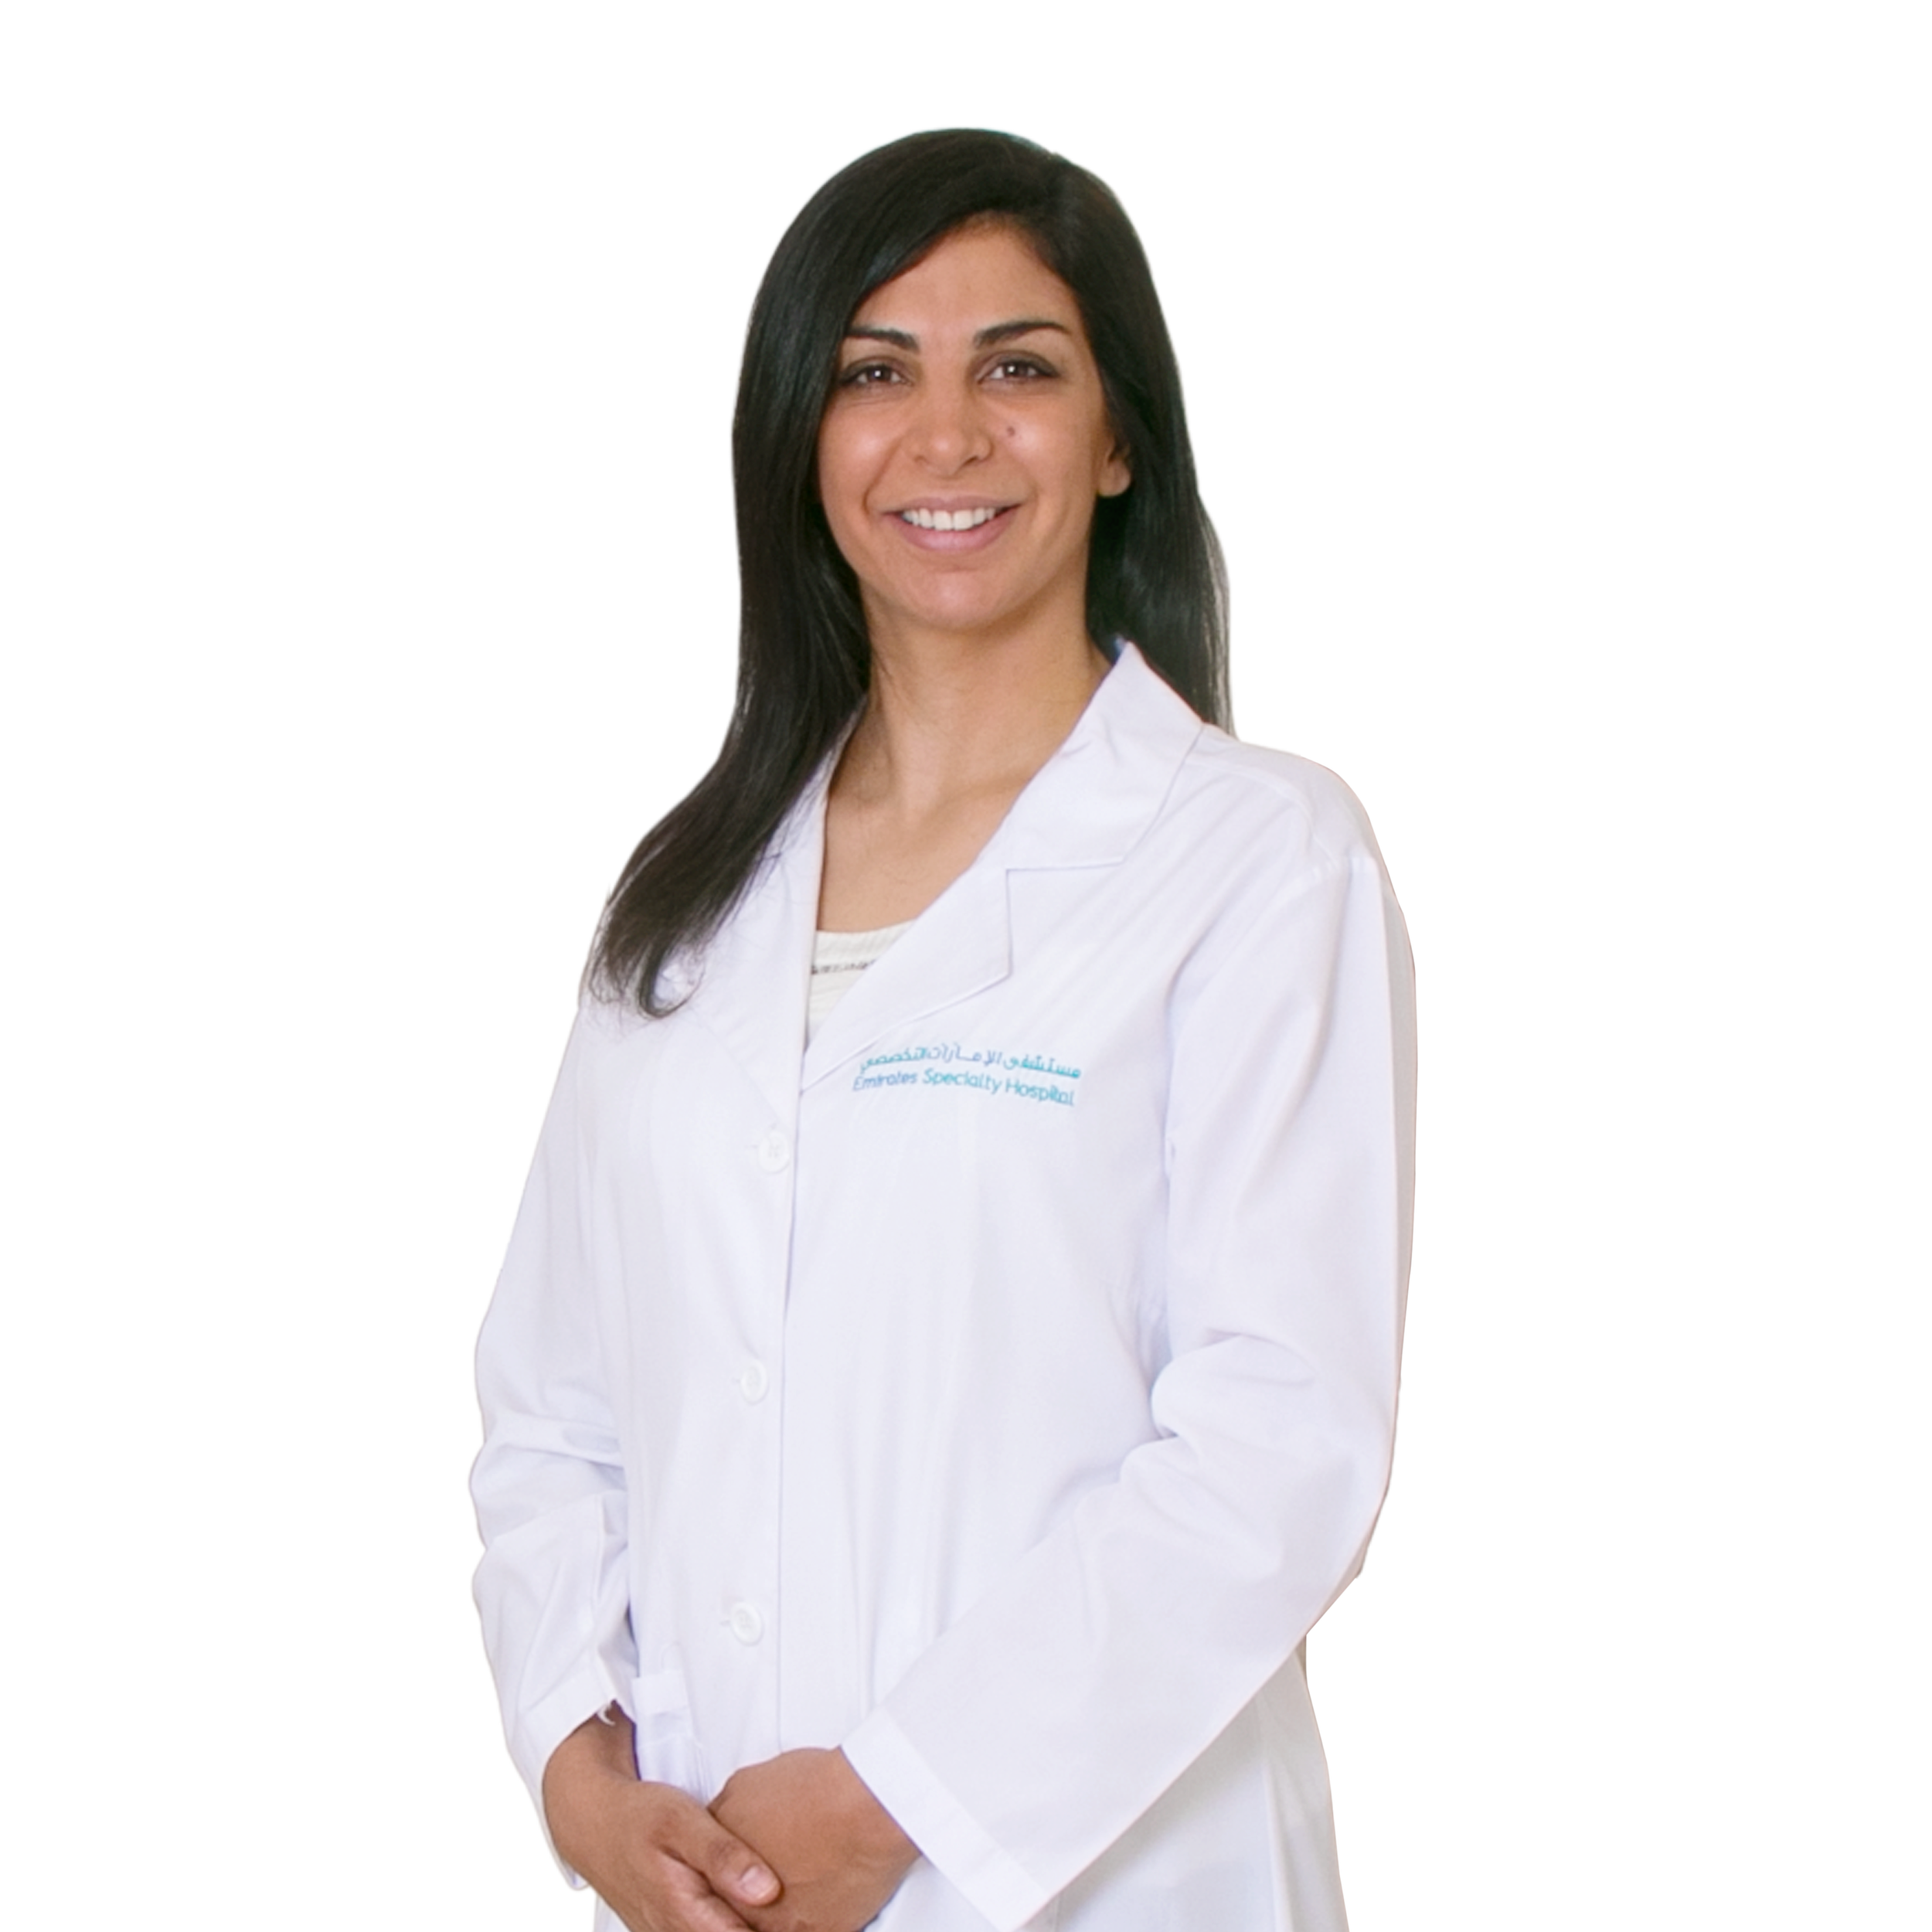 Infectious-Diseases-Dr-Youmna-Dirani-Specialist-Infectious-Diseases